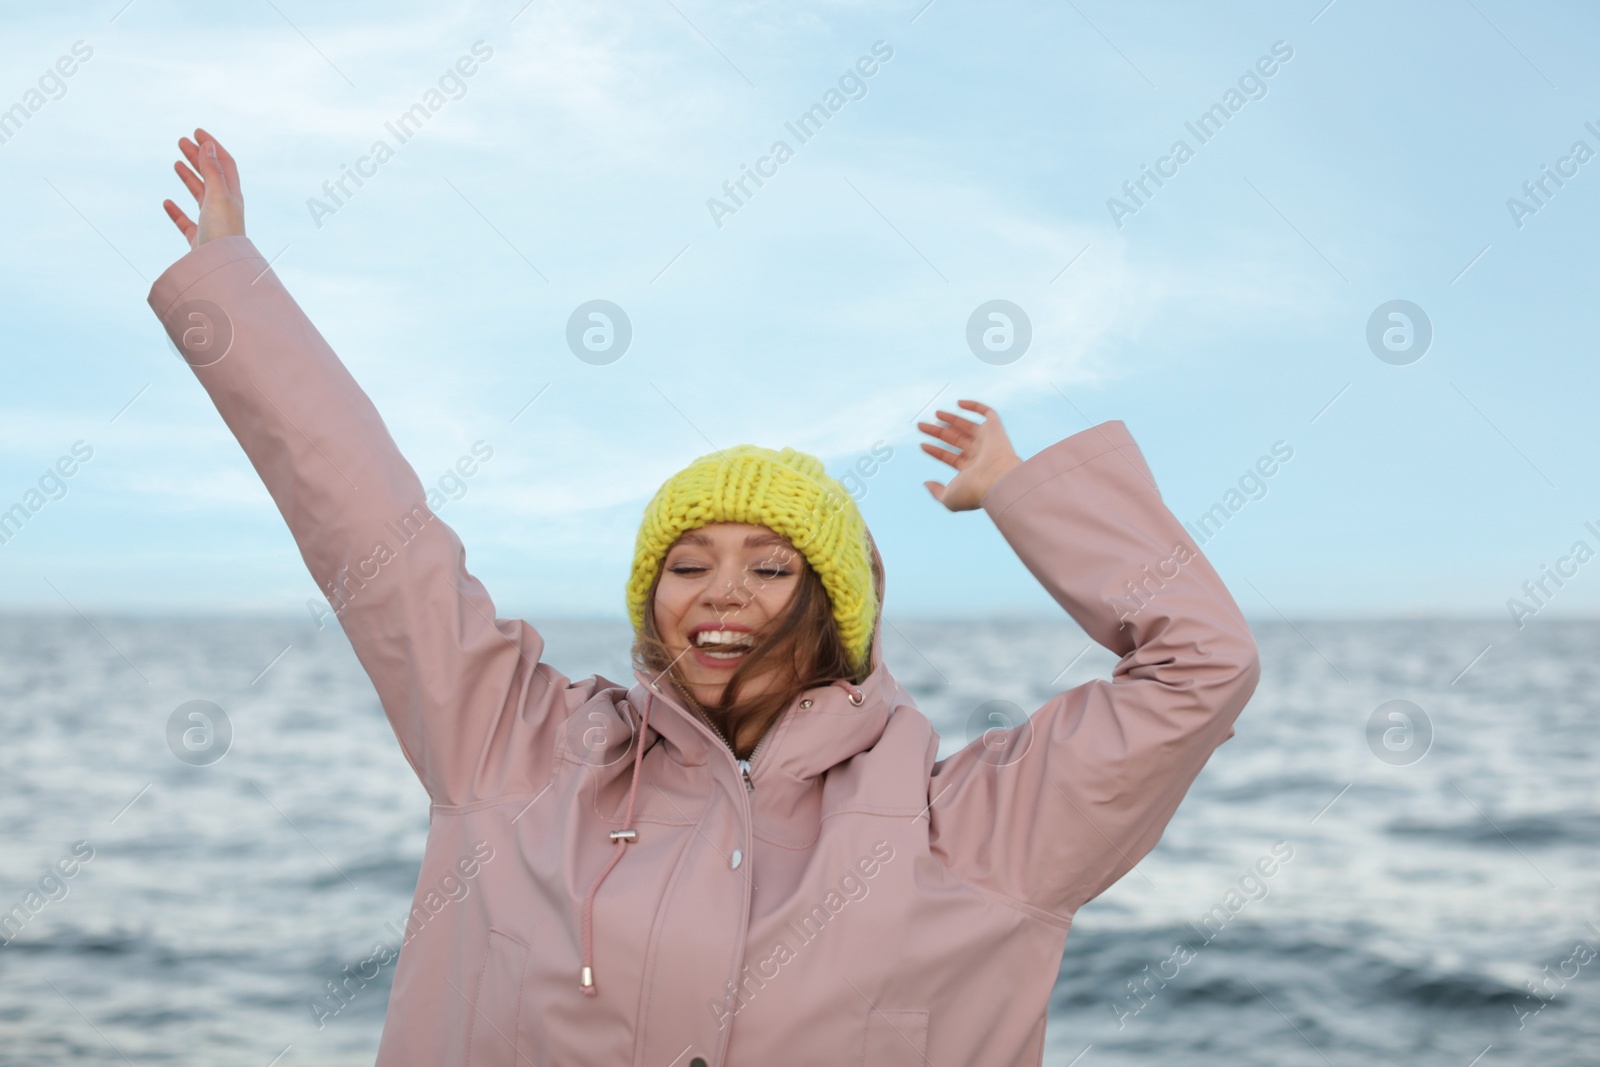 Photo of Stylish young woman spending time near sea